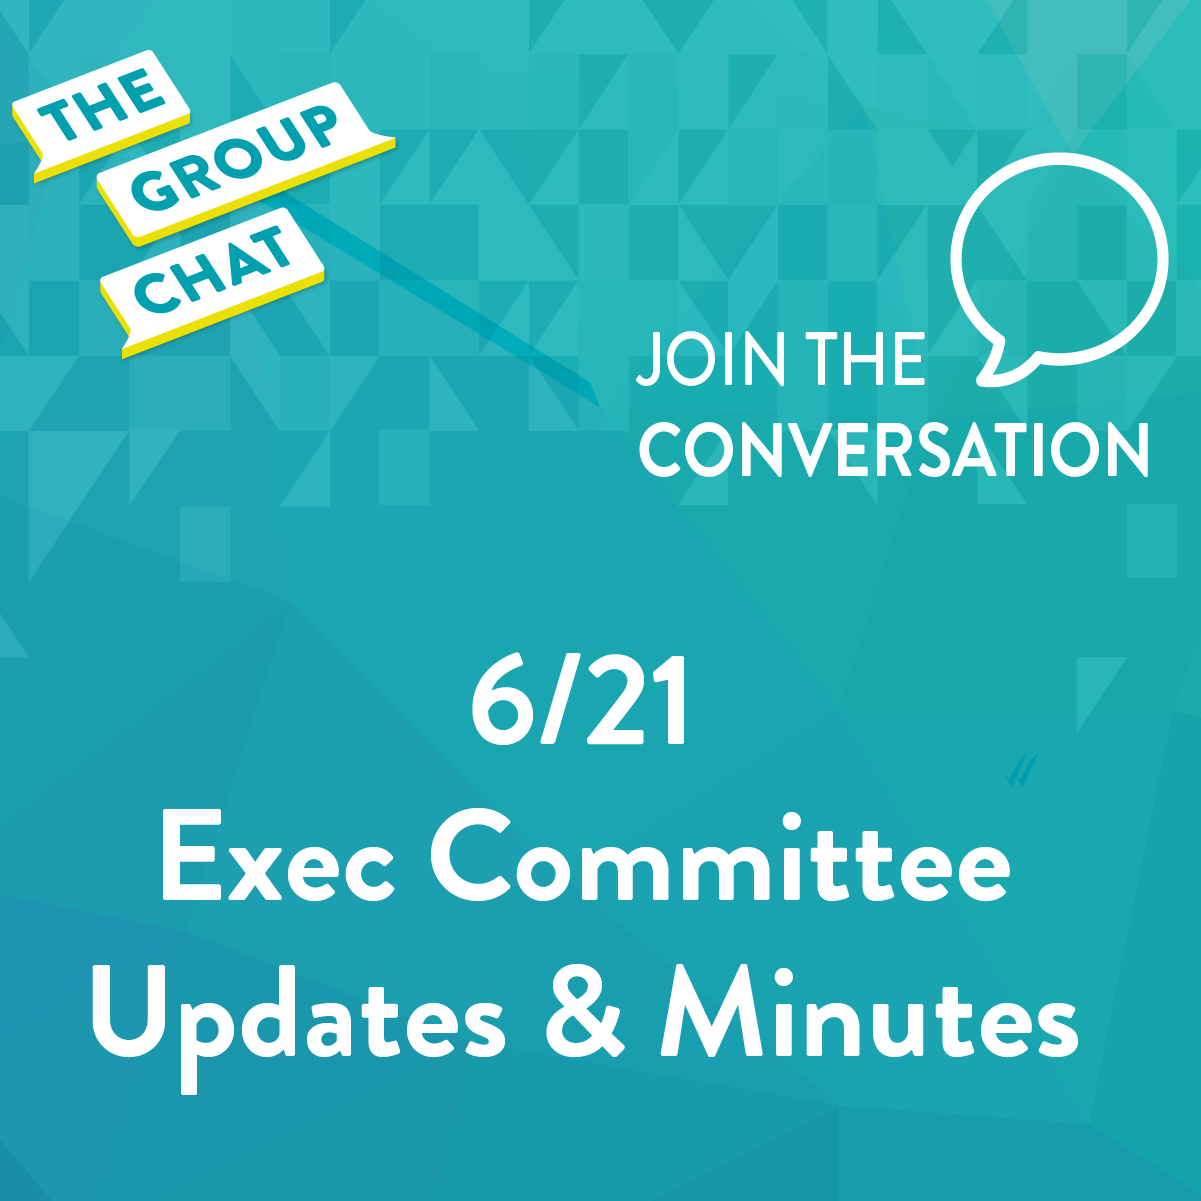 6/21 Executive Committee Update & Minutes